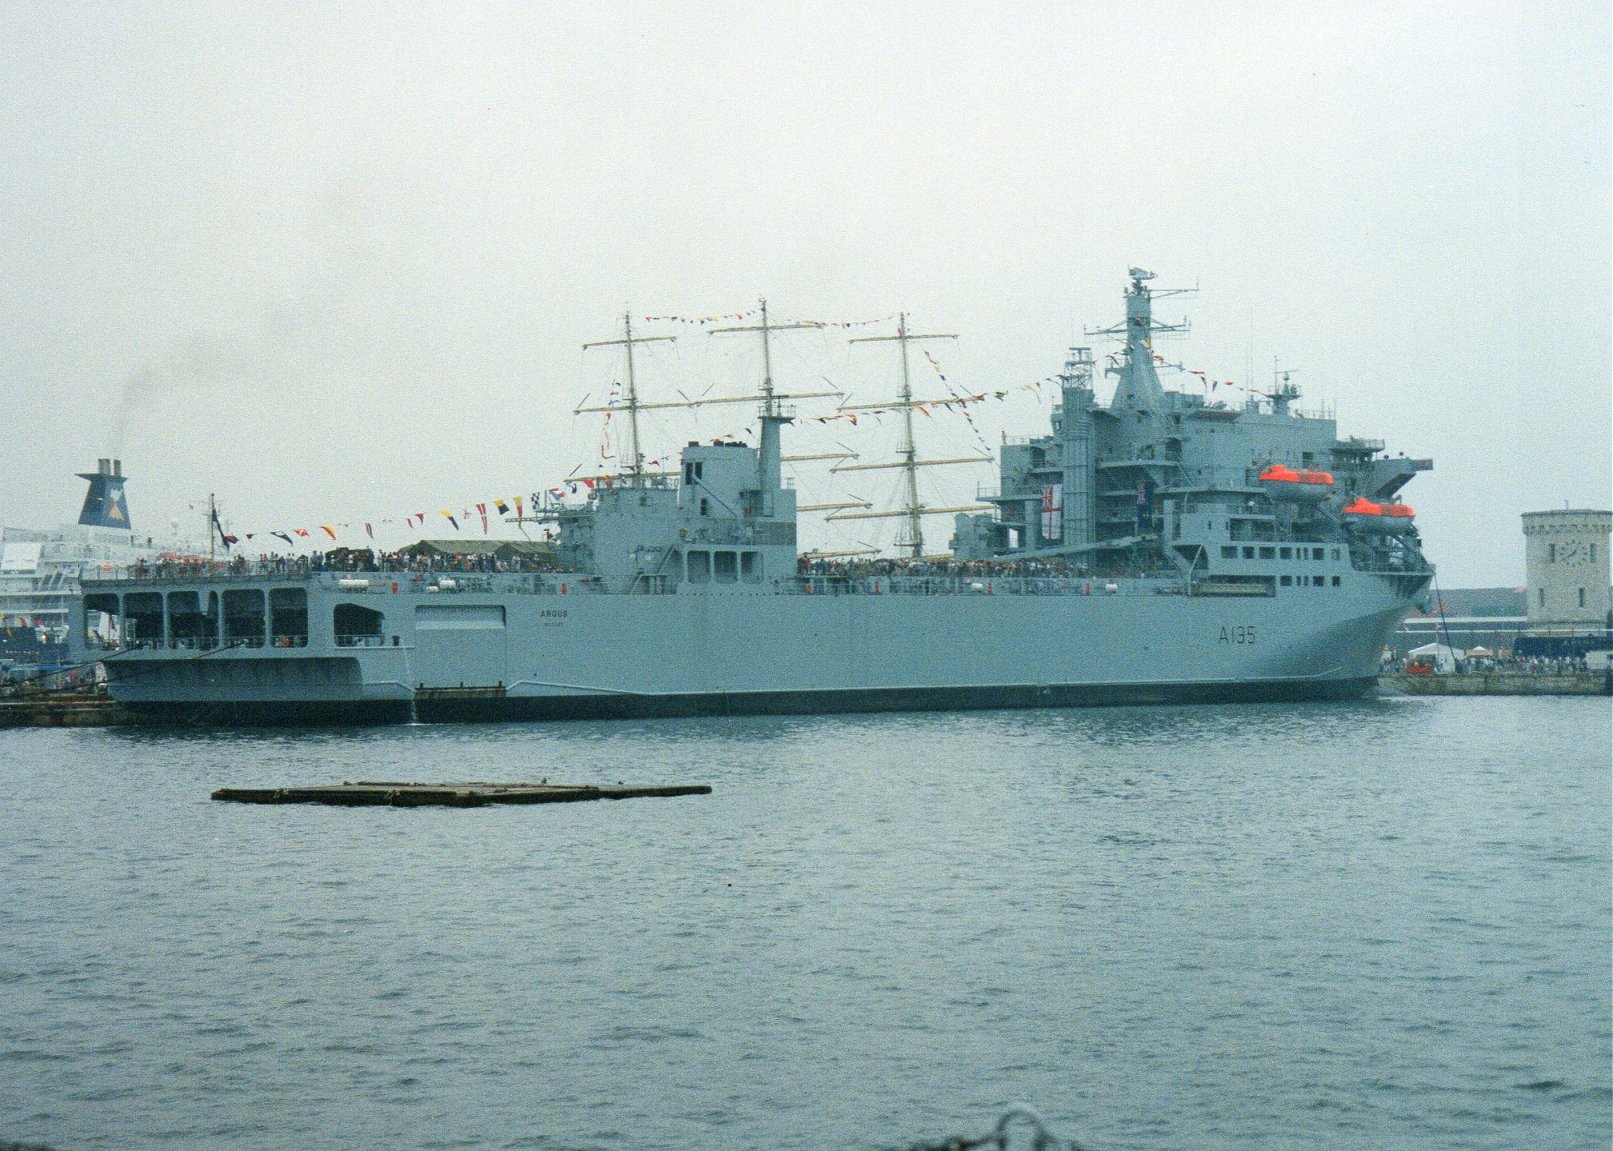 RFA Argus, primary casualty reception ship, Portsmouth 2001.